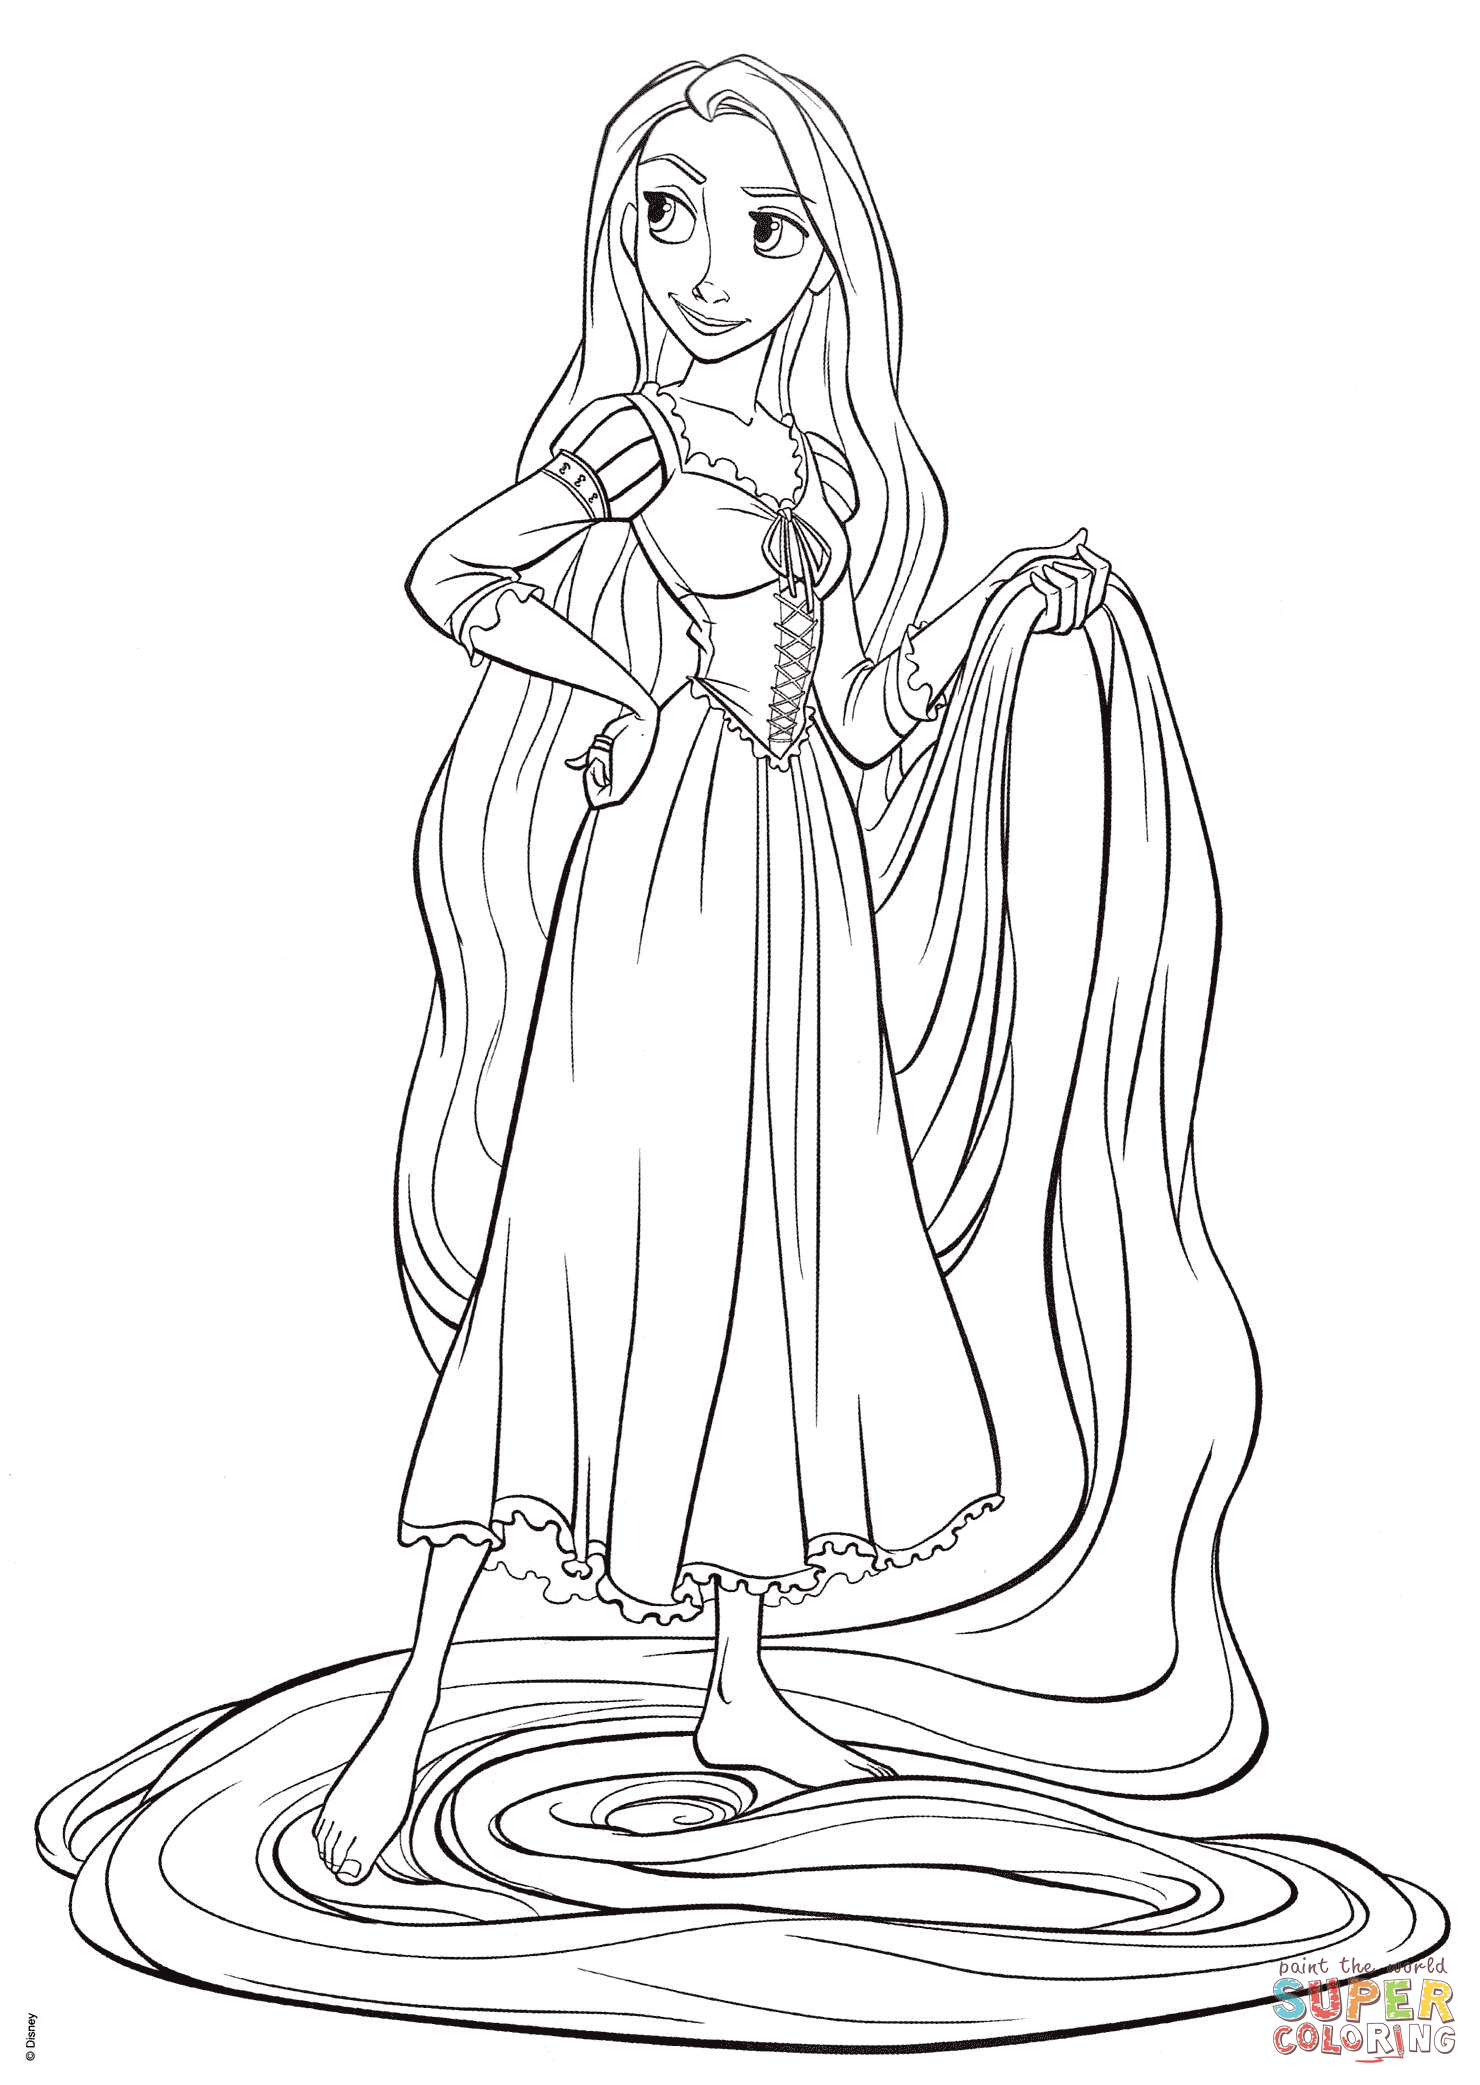 Rapunzel from Tangled coloring page ...supercoloring.com